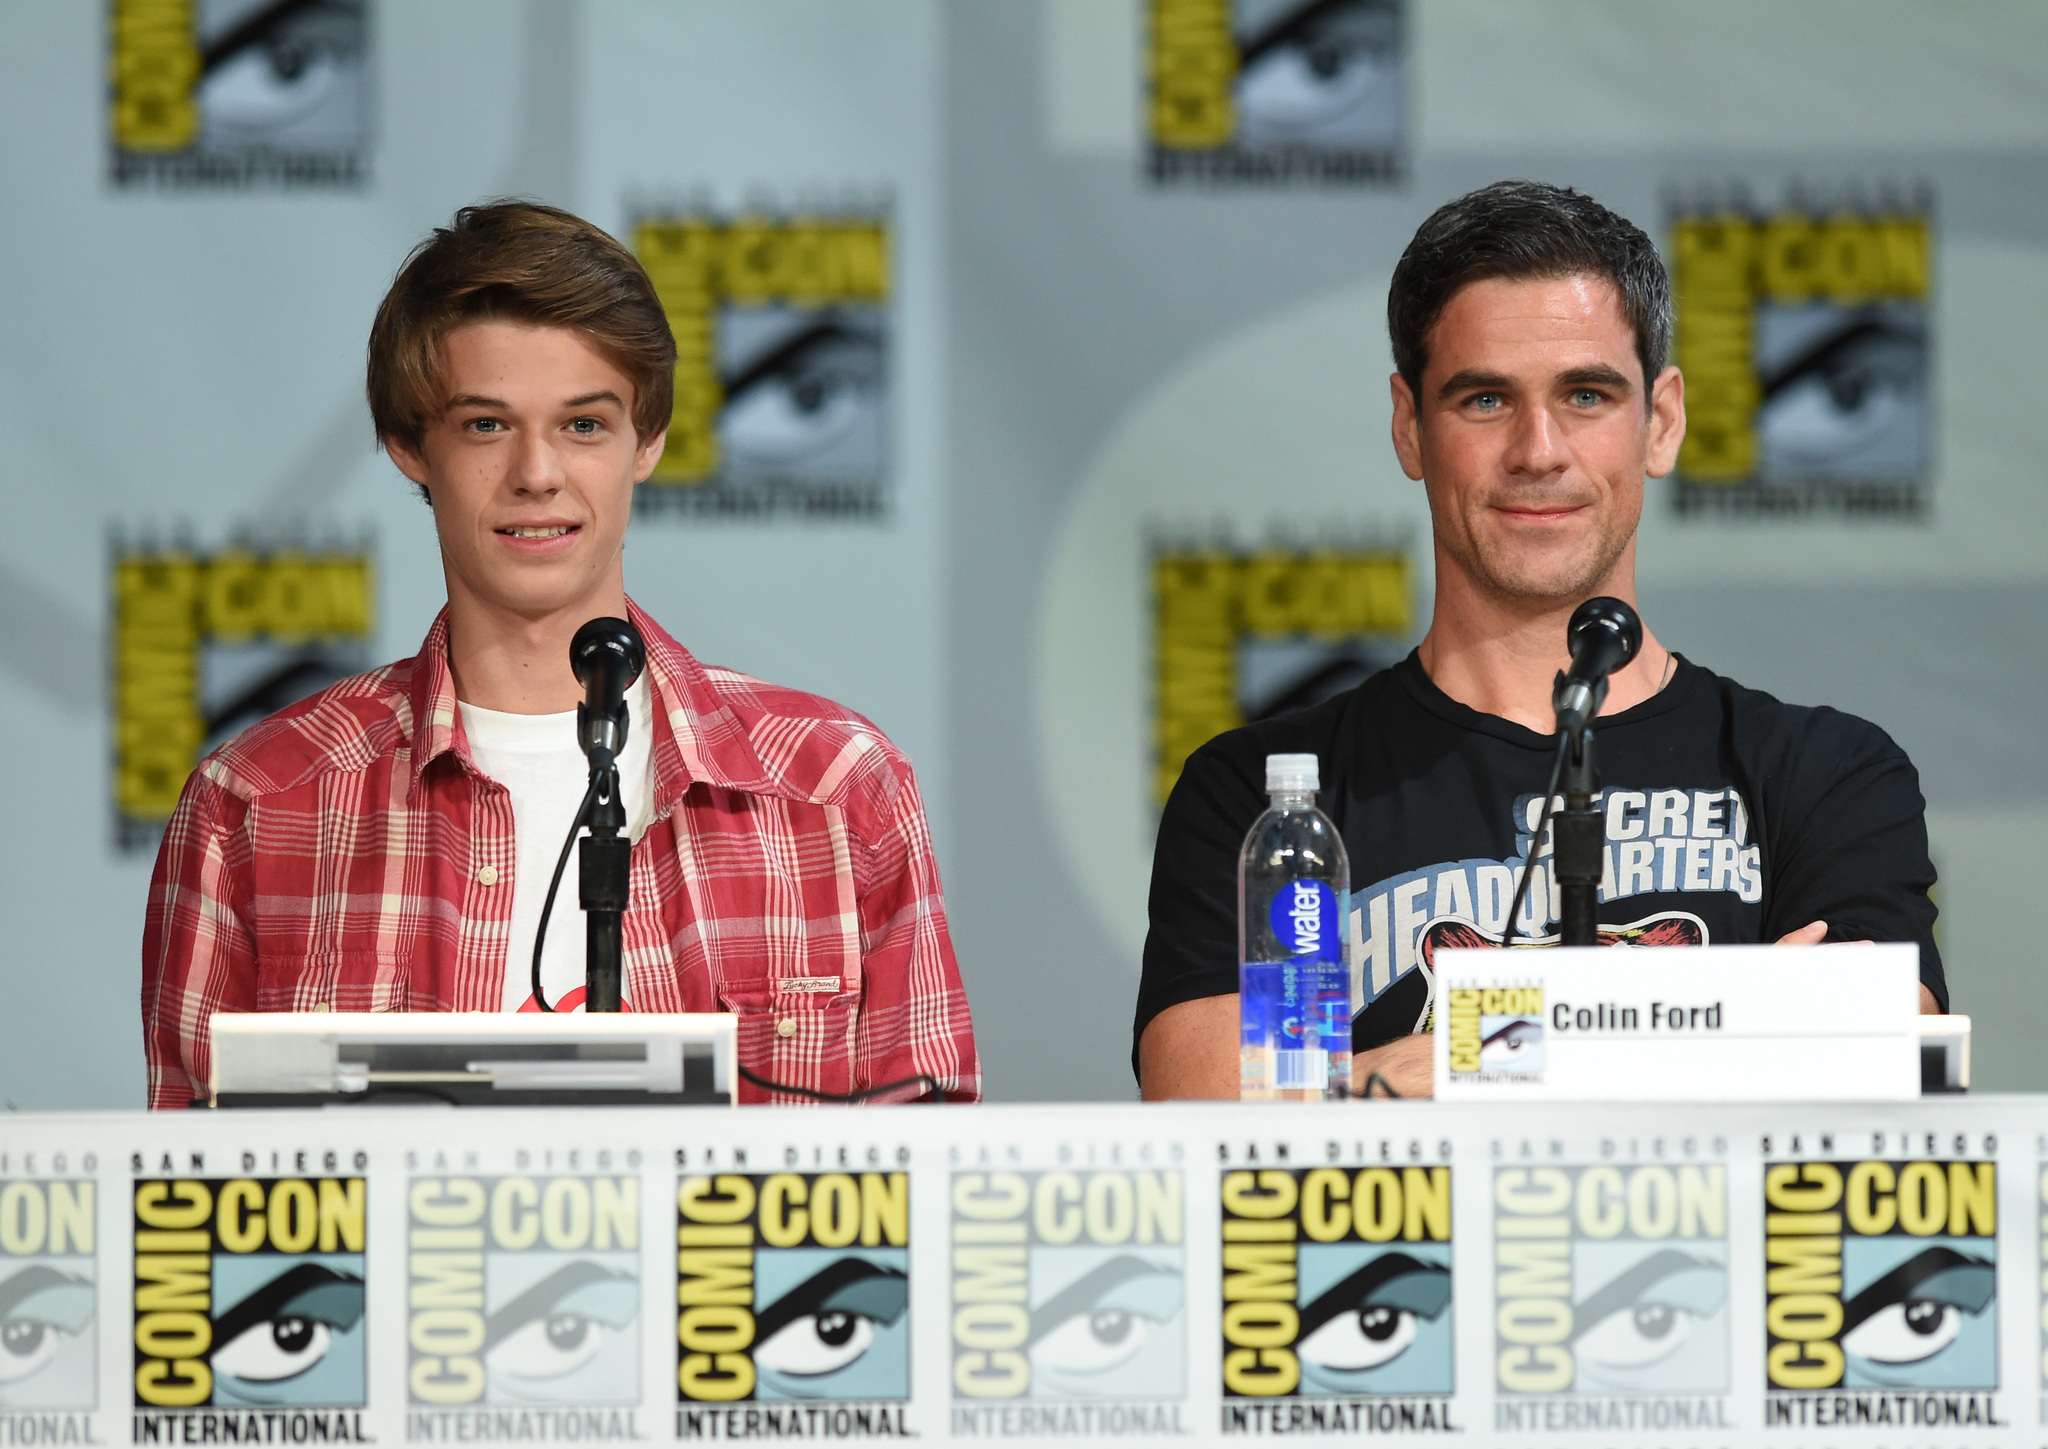 Eddie Cahill and Colin Ford at event of Under the Dome (2013)